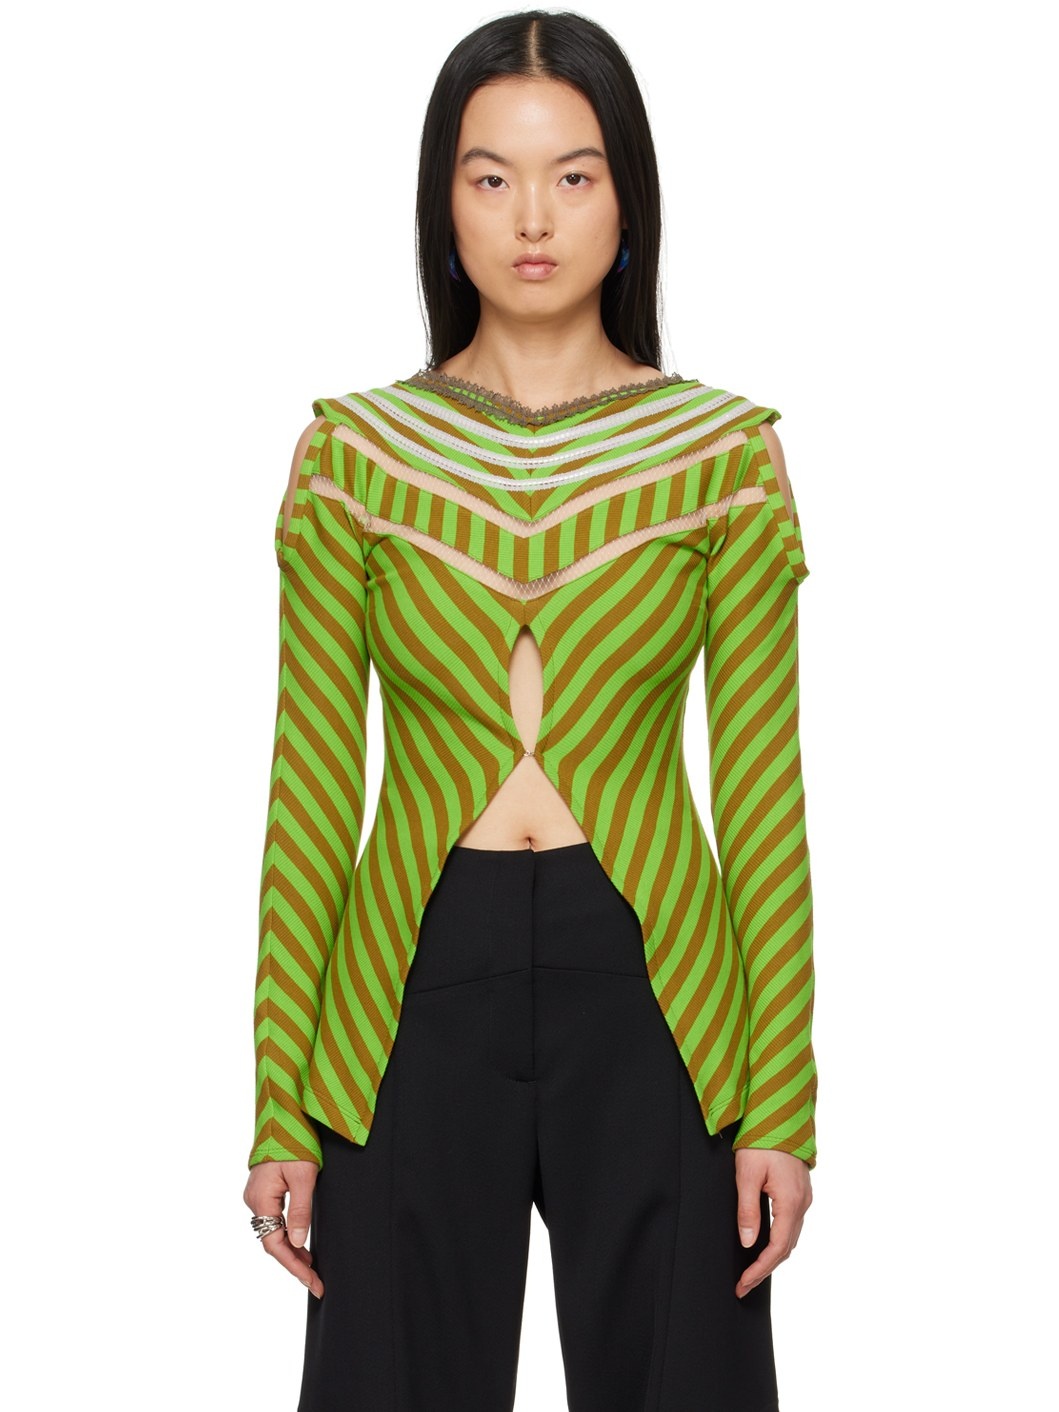 Green Panoply Top - 1